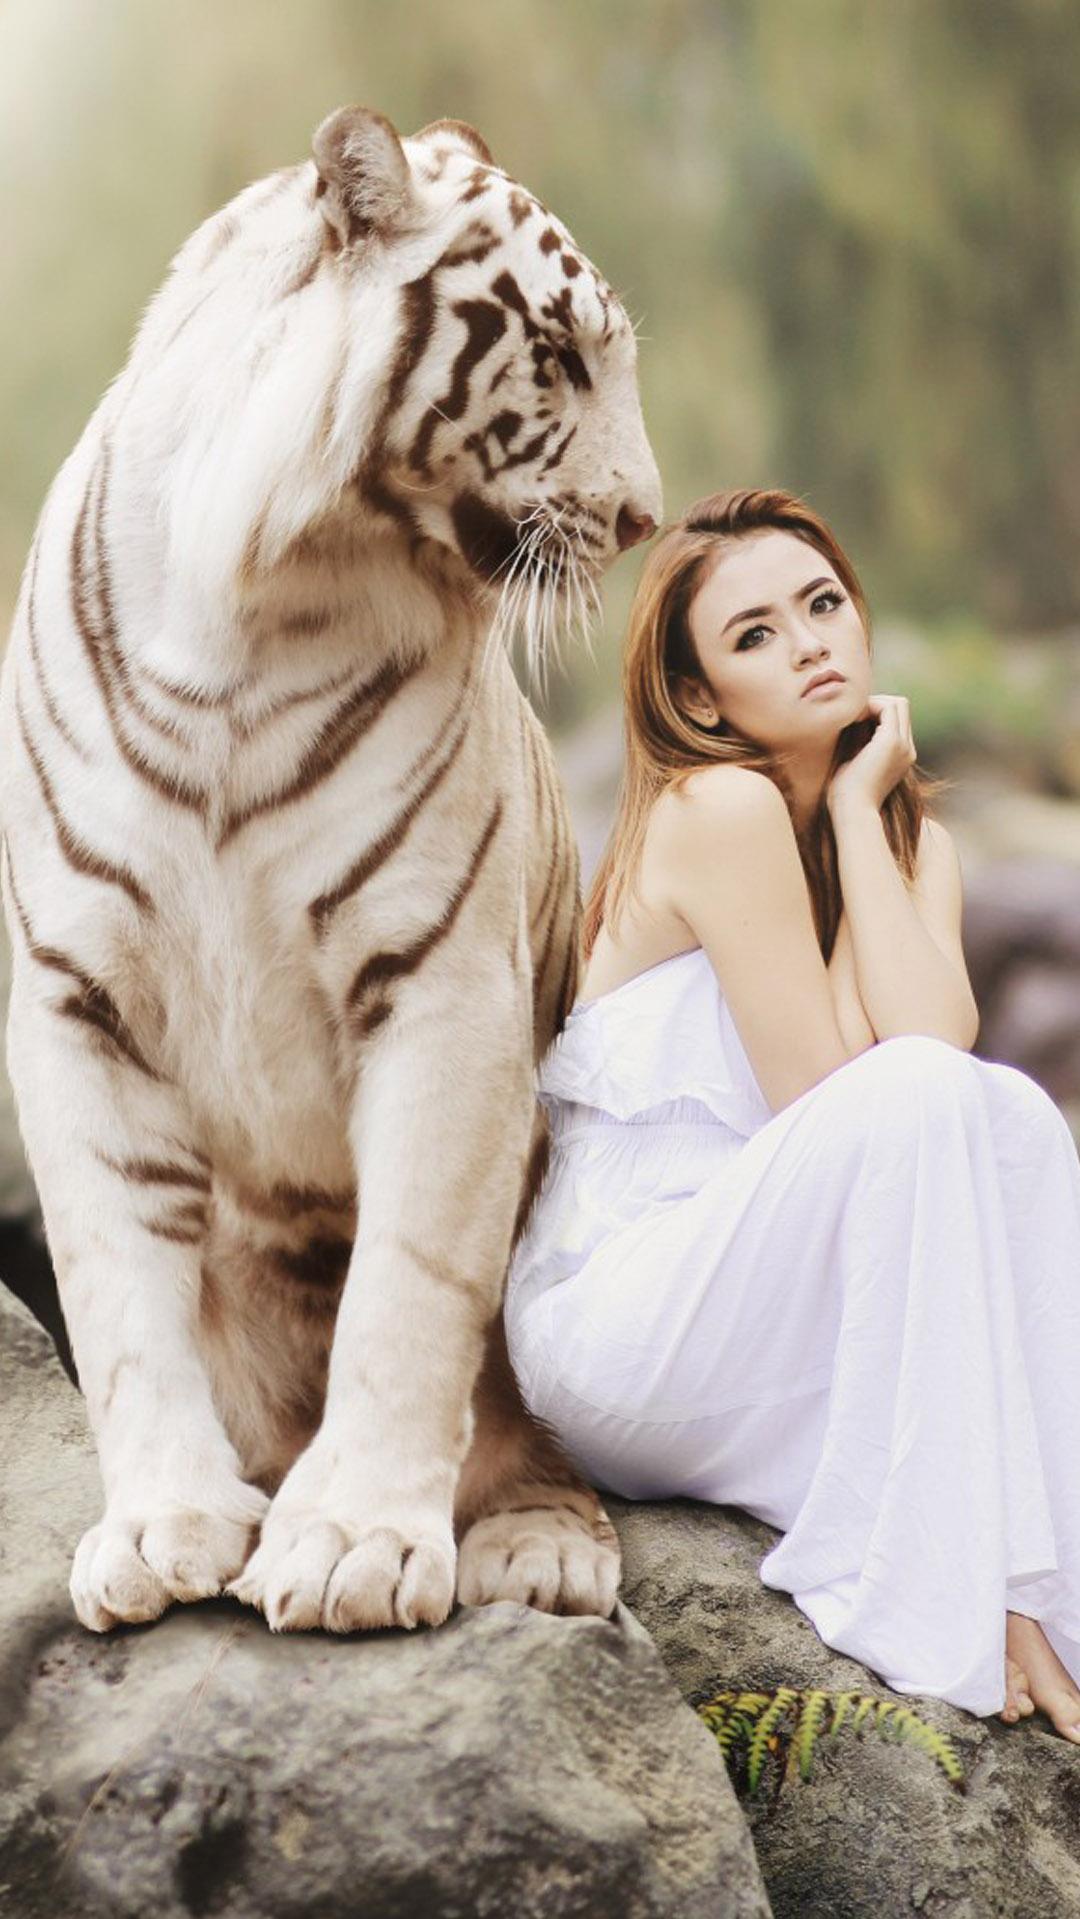 Asian Model With White Tiger Photoshoot 4K Ultra HD Mobile Wallpaper